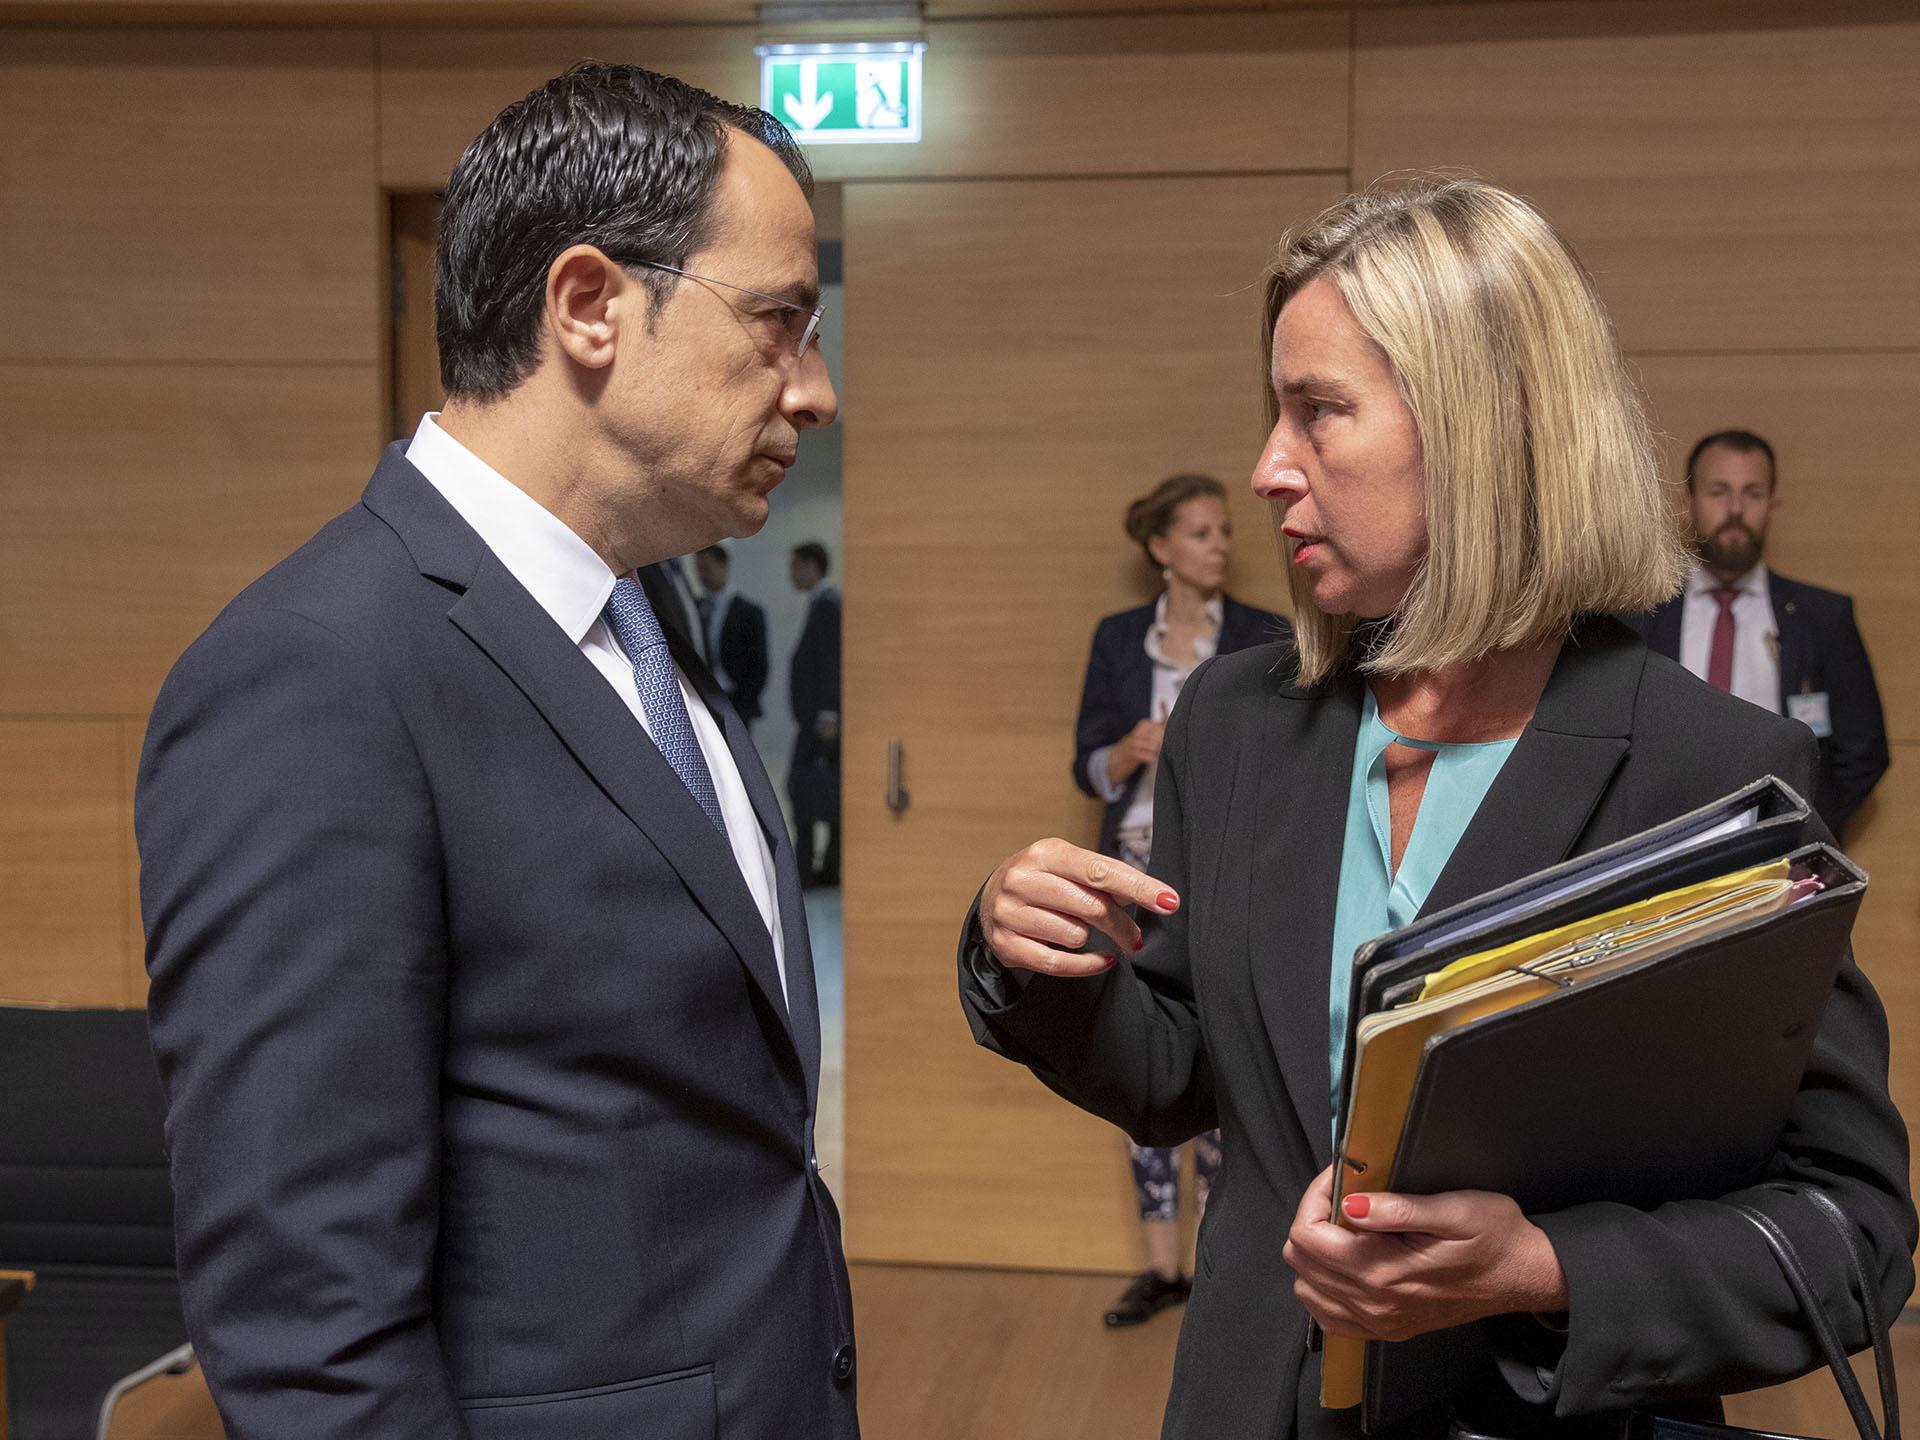 Cypriot Minister of Foreign Affairs Nikos Christodoulides (L) meets with European Union Foreign Policy Chief Federica Mogherini